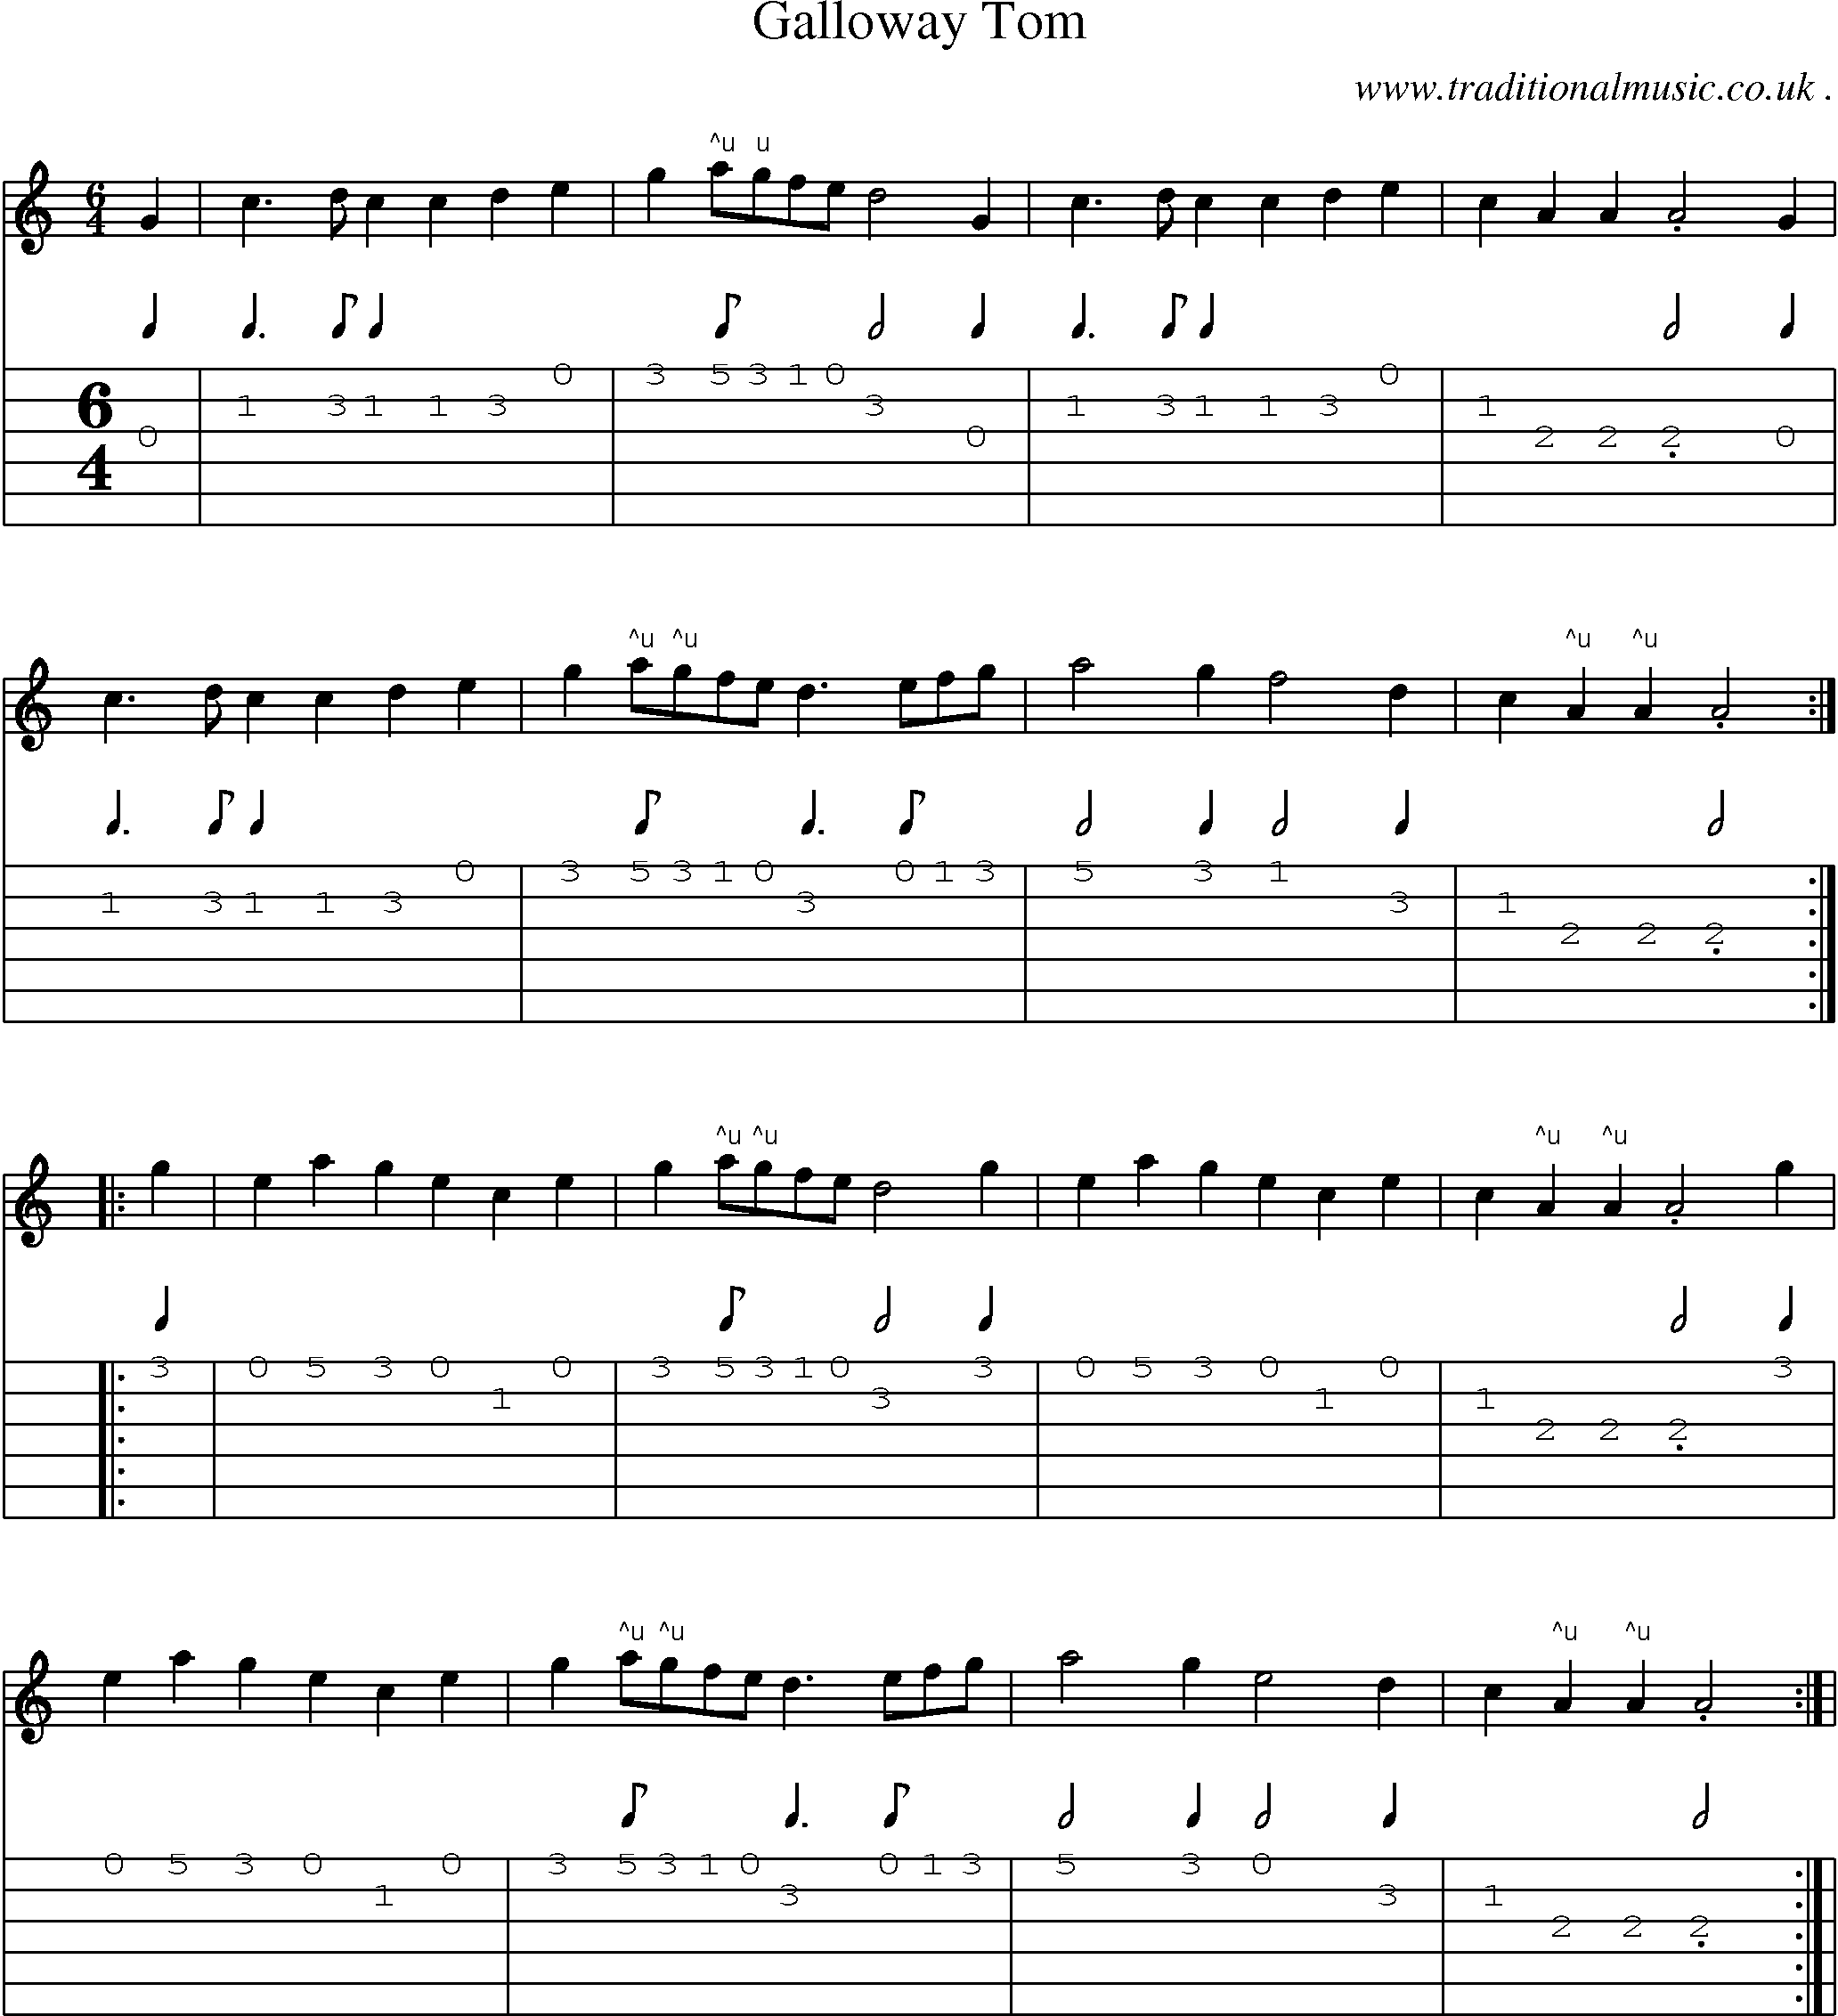 Sheet-Music and Guitar Tabs for Galloway Tom